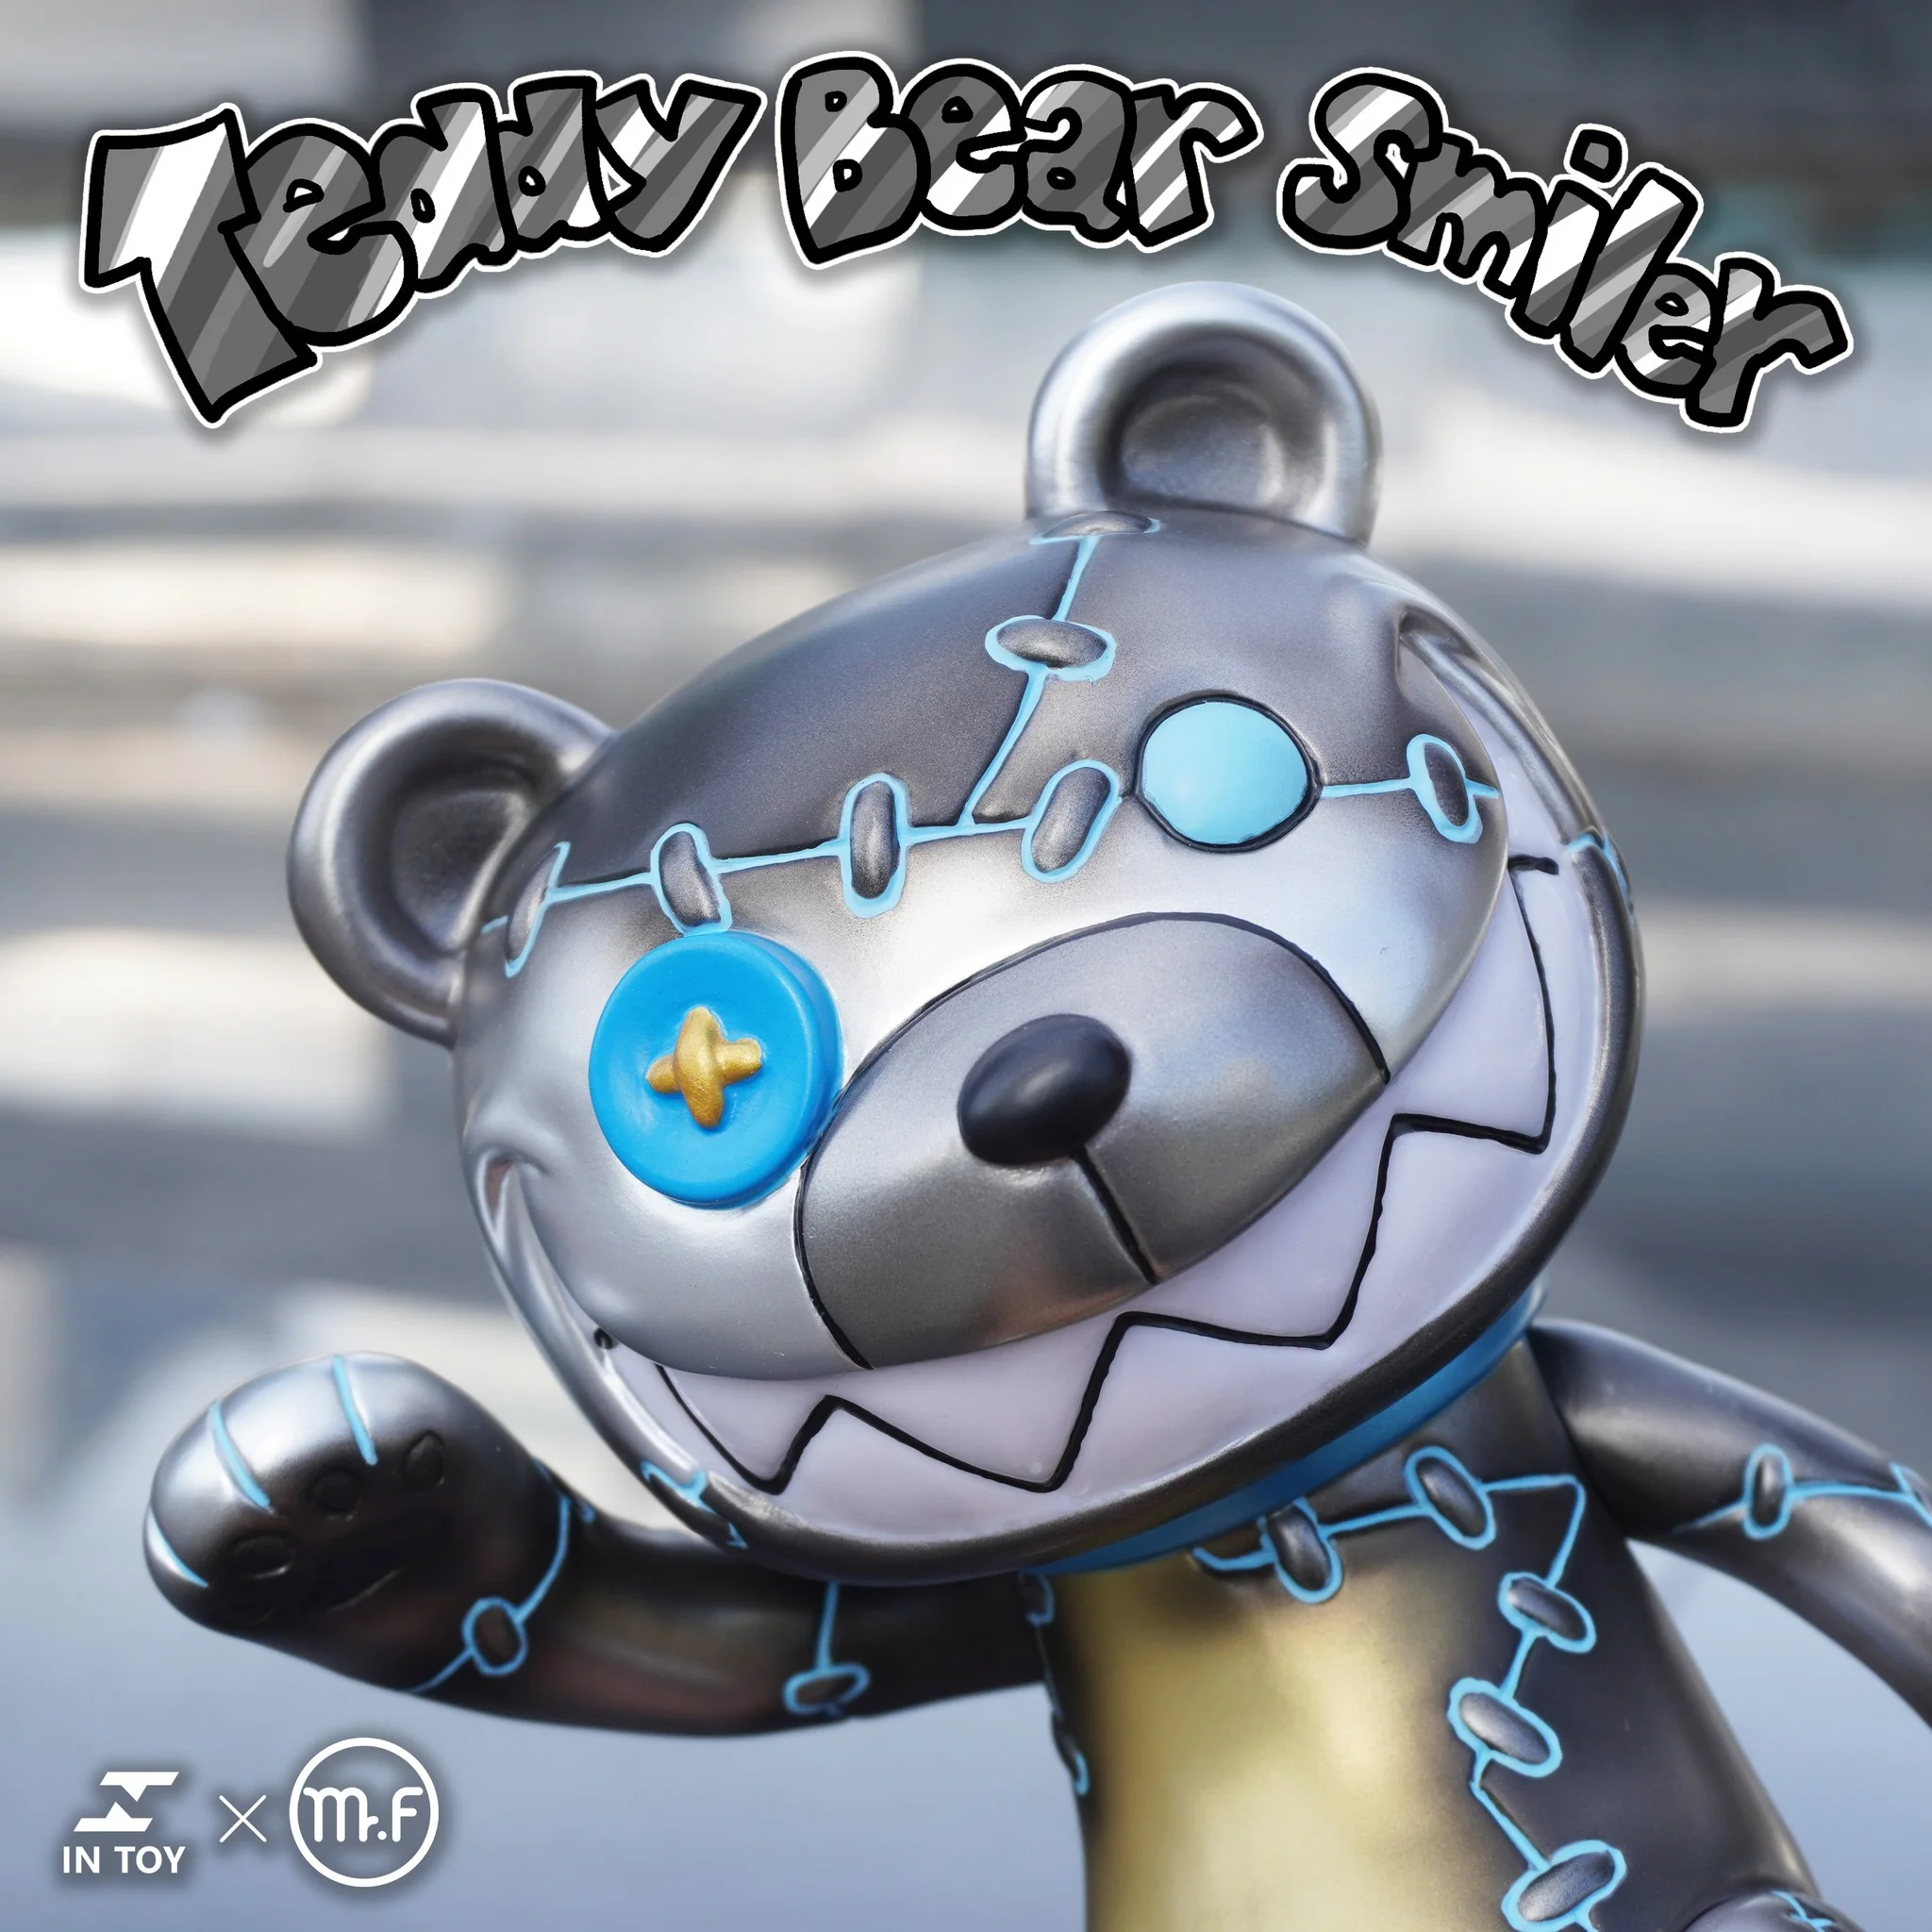 Teddy Bear Smilers-Robot .Ver by INTOYS